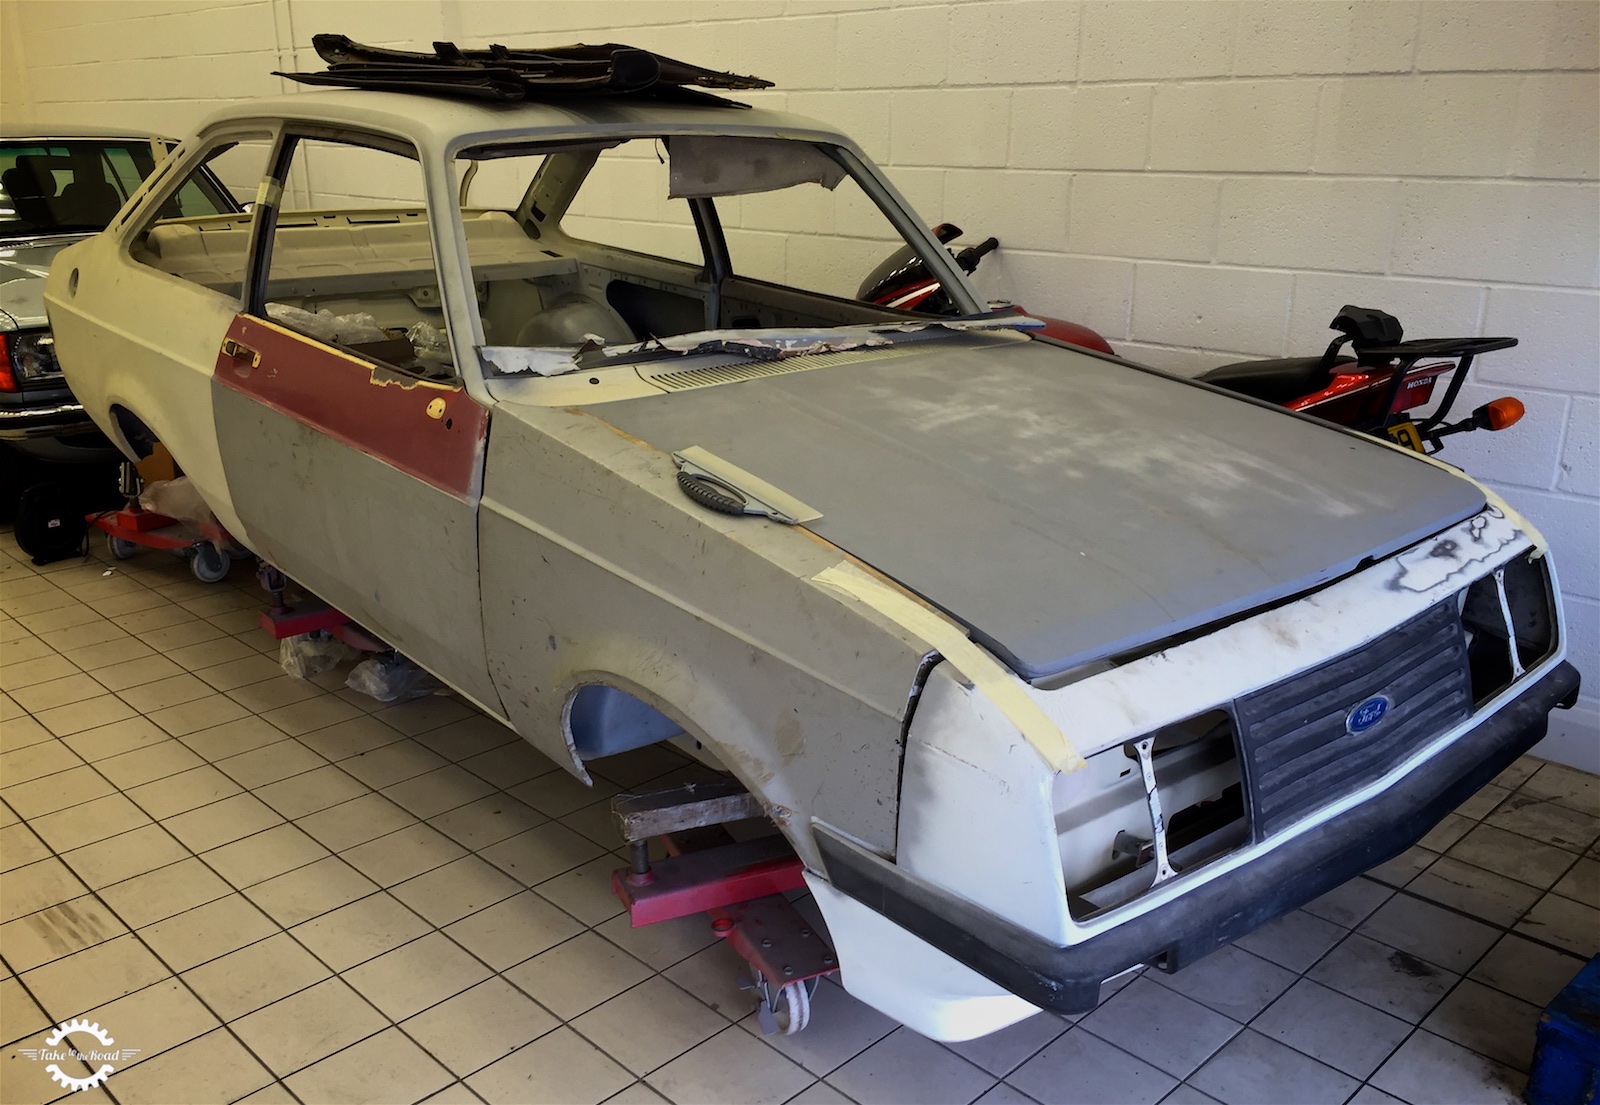 5 Things You Should Know Before Restoring A Classic Car